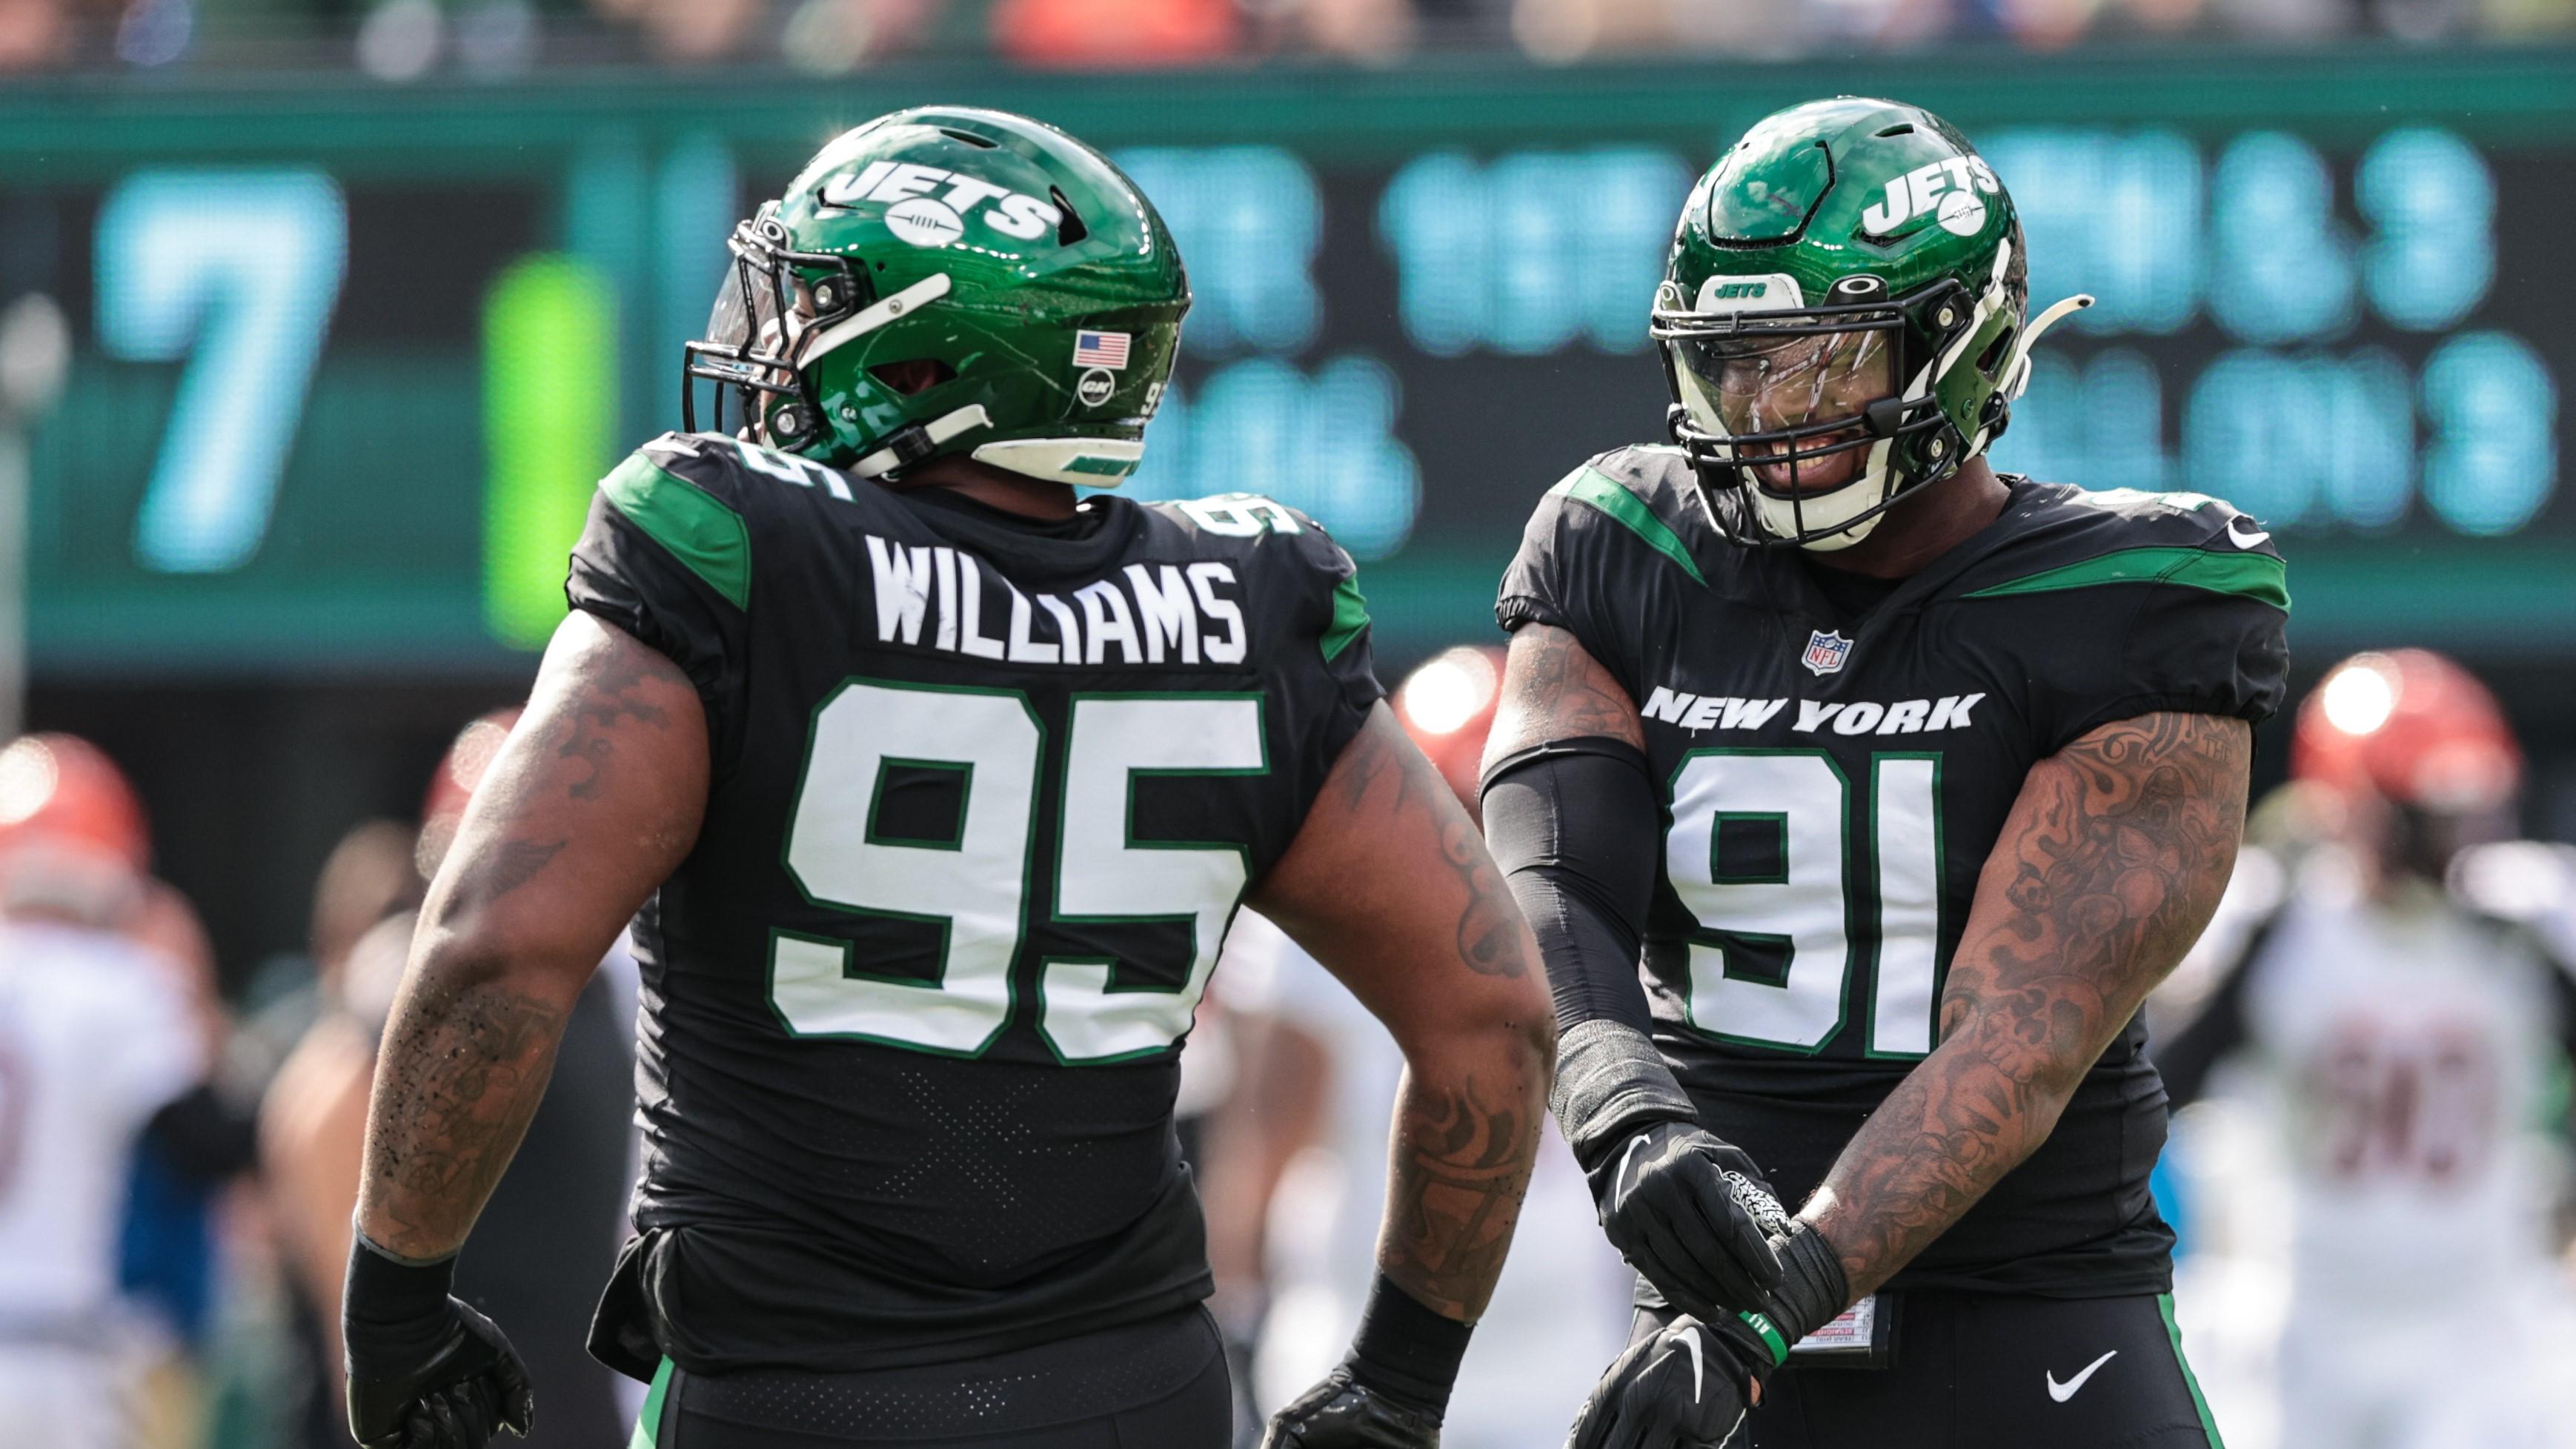 New York Jets defensive tackle Quinnen Williams (95) and New York Jets defensive end John Franklin-Myers (91) celebrates a defensive stop against the Cincinnati Bengals. / Vincent Carchietta-USA TODAY Sports